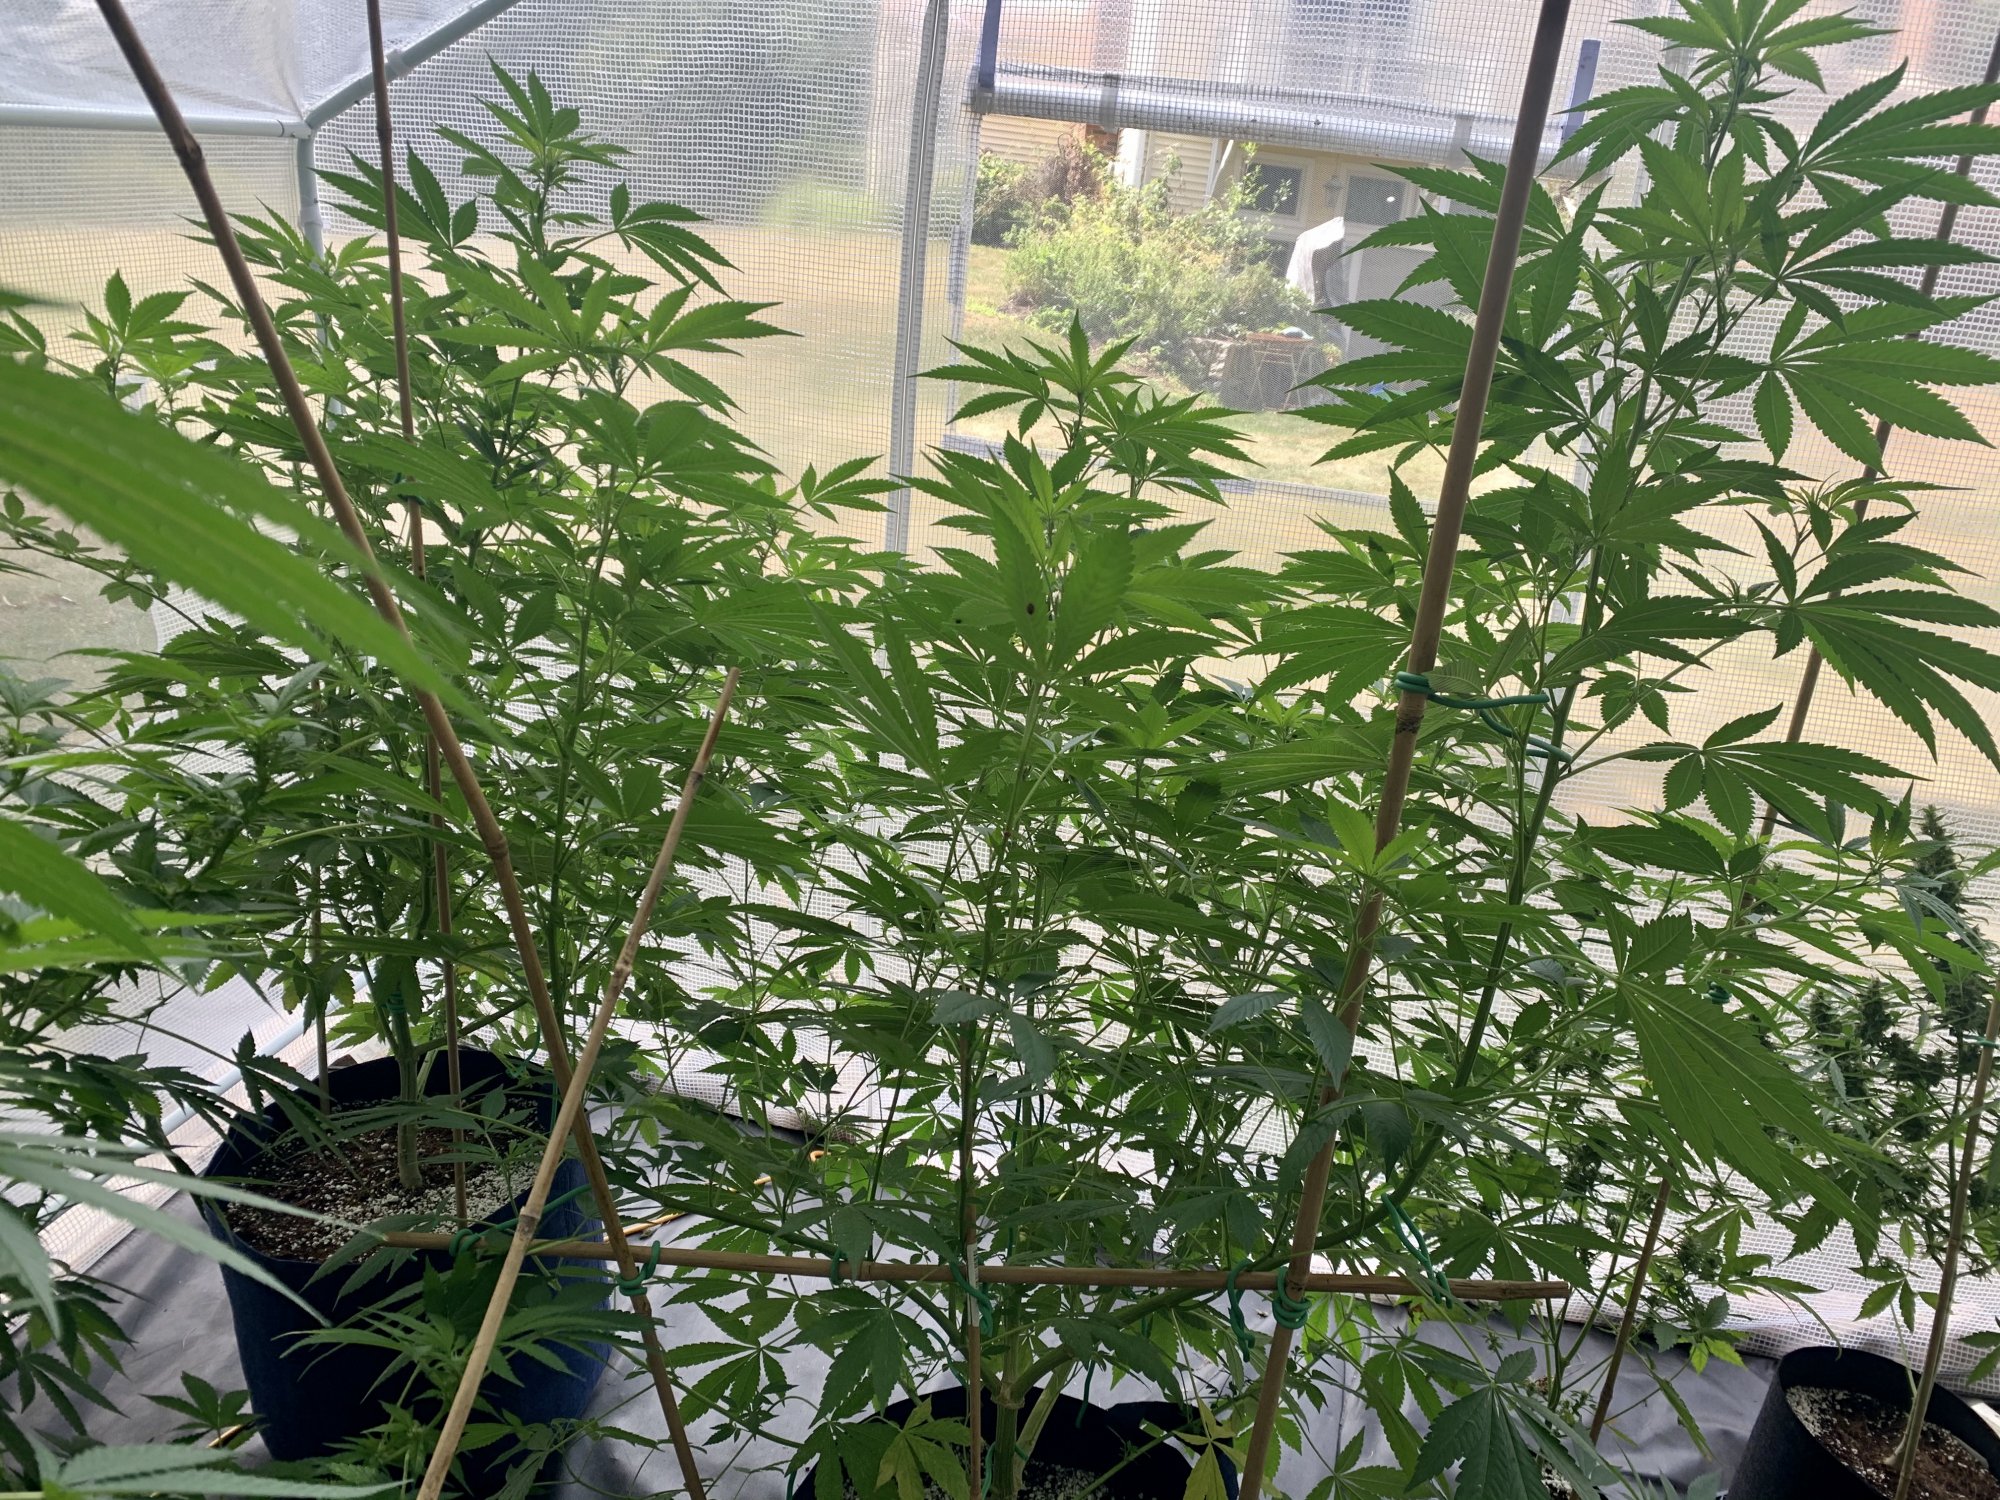 Any defoliationpruning tips getting crowded in greenhouse 3